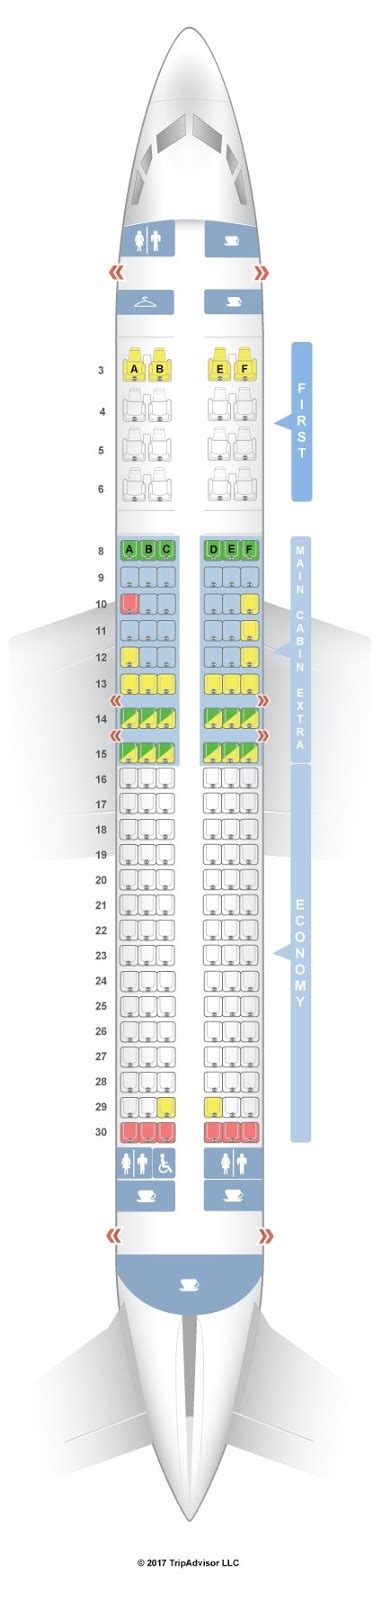 Boeing 737 800 seating chart american airlines. For your next American Airlines flight, use this seating chart to get the most comfortable seats, legroom, and recline on . Seat Maps; Airlines; Cheap Flights; Comparison Charts. Short-haul Economy Class ... Boeing 737-800 (738) Layout 2; Boeing 777-200 (777) Boeing 777-300ER (77W) 